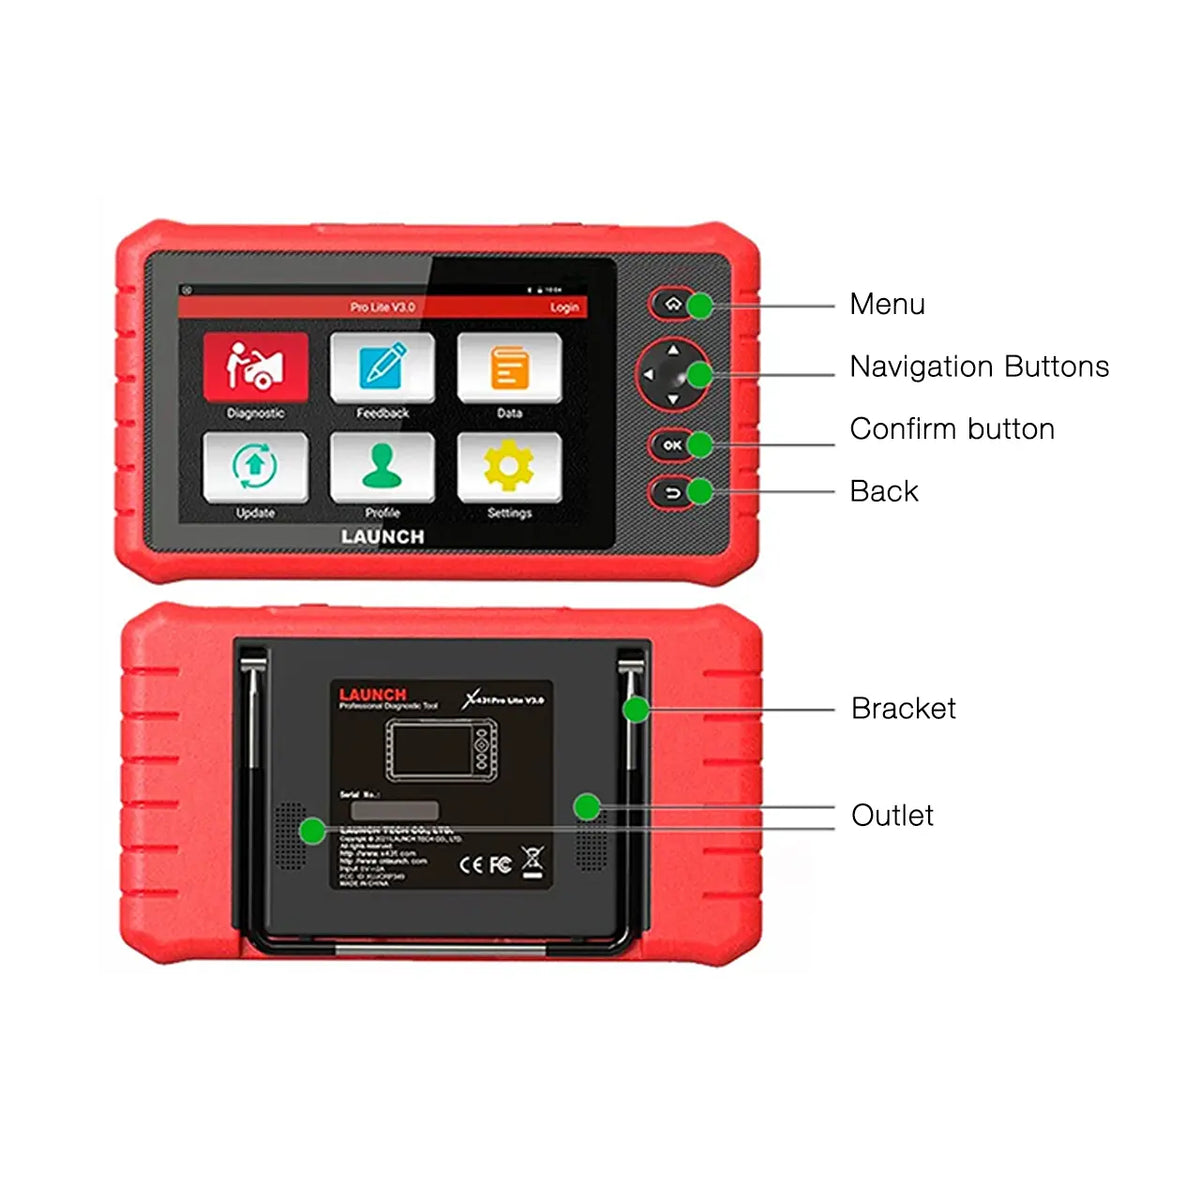 Launch X-431 Pro Lite V3.0 Diagnostic Scan Tool Touch Screen - FairTools